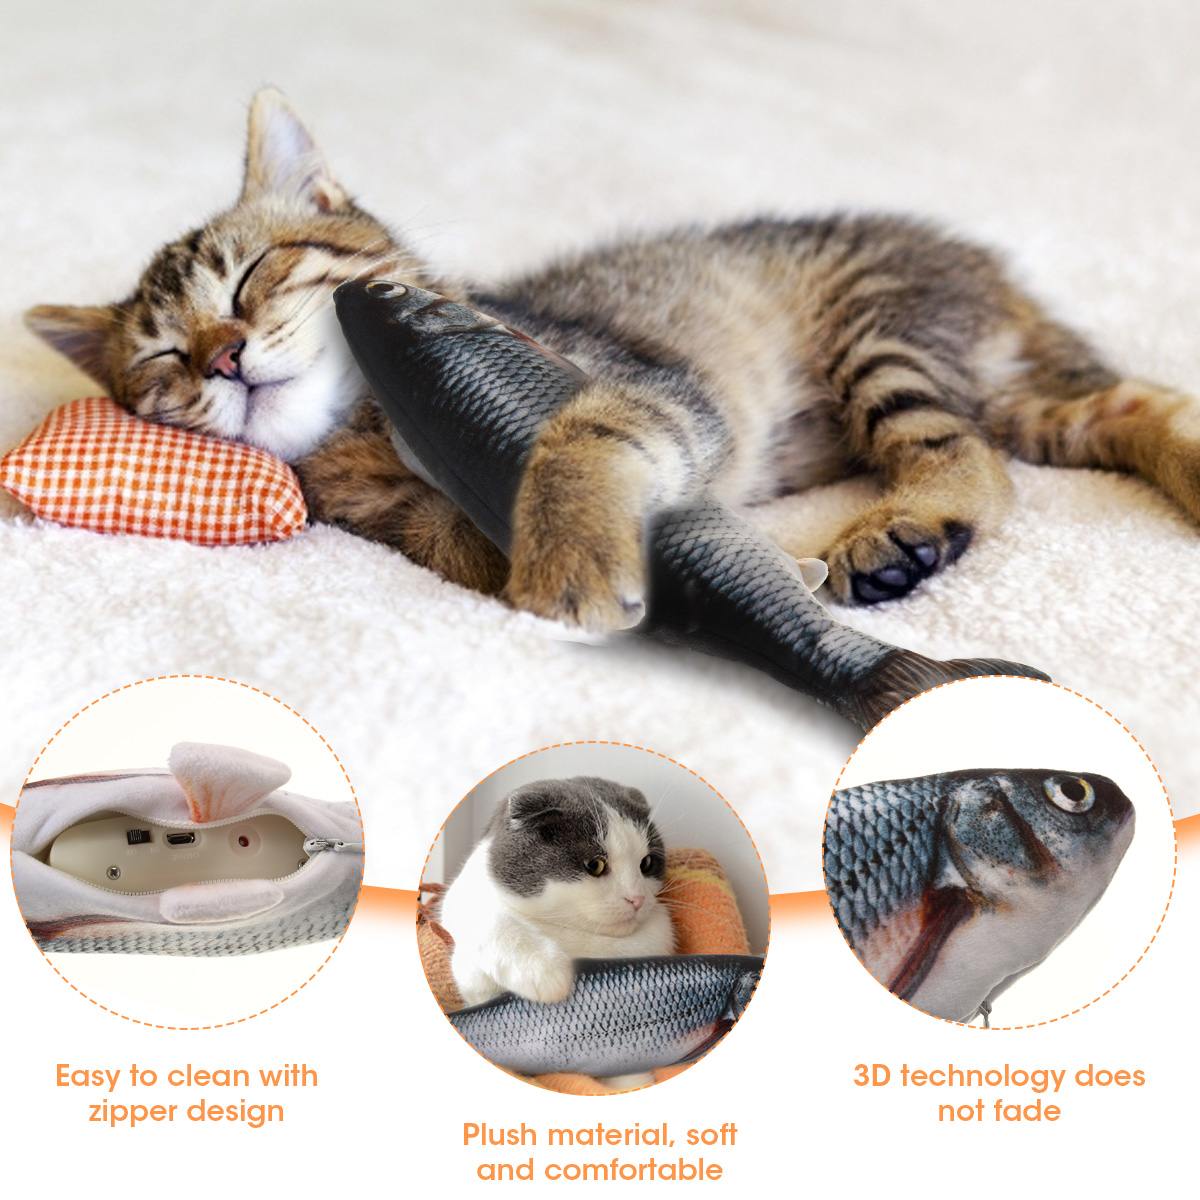 Looking for a new toy for your pets? This fish kicker toy is electric, stimulating for your pet, and a plush, soft material. Check out our website to get yours delivered directly to you!

deluxeinteriordecor.com/product/cat-ki…

#pet #pets #petcare #petstore #petlover #pettoys #happypets